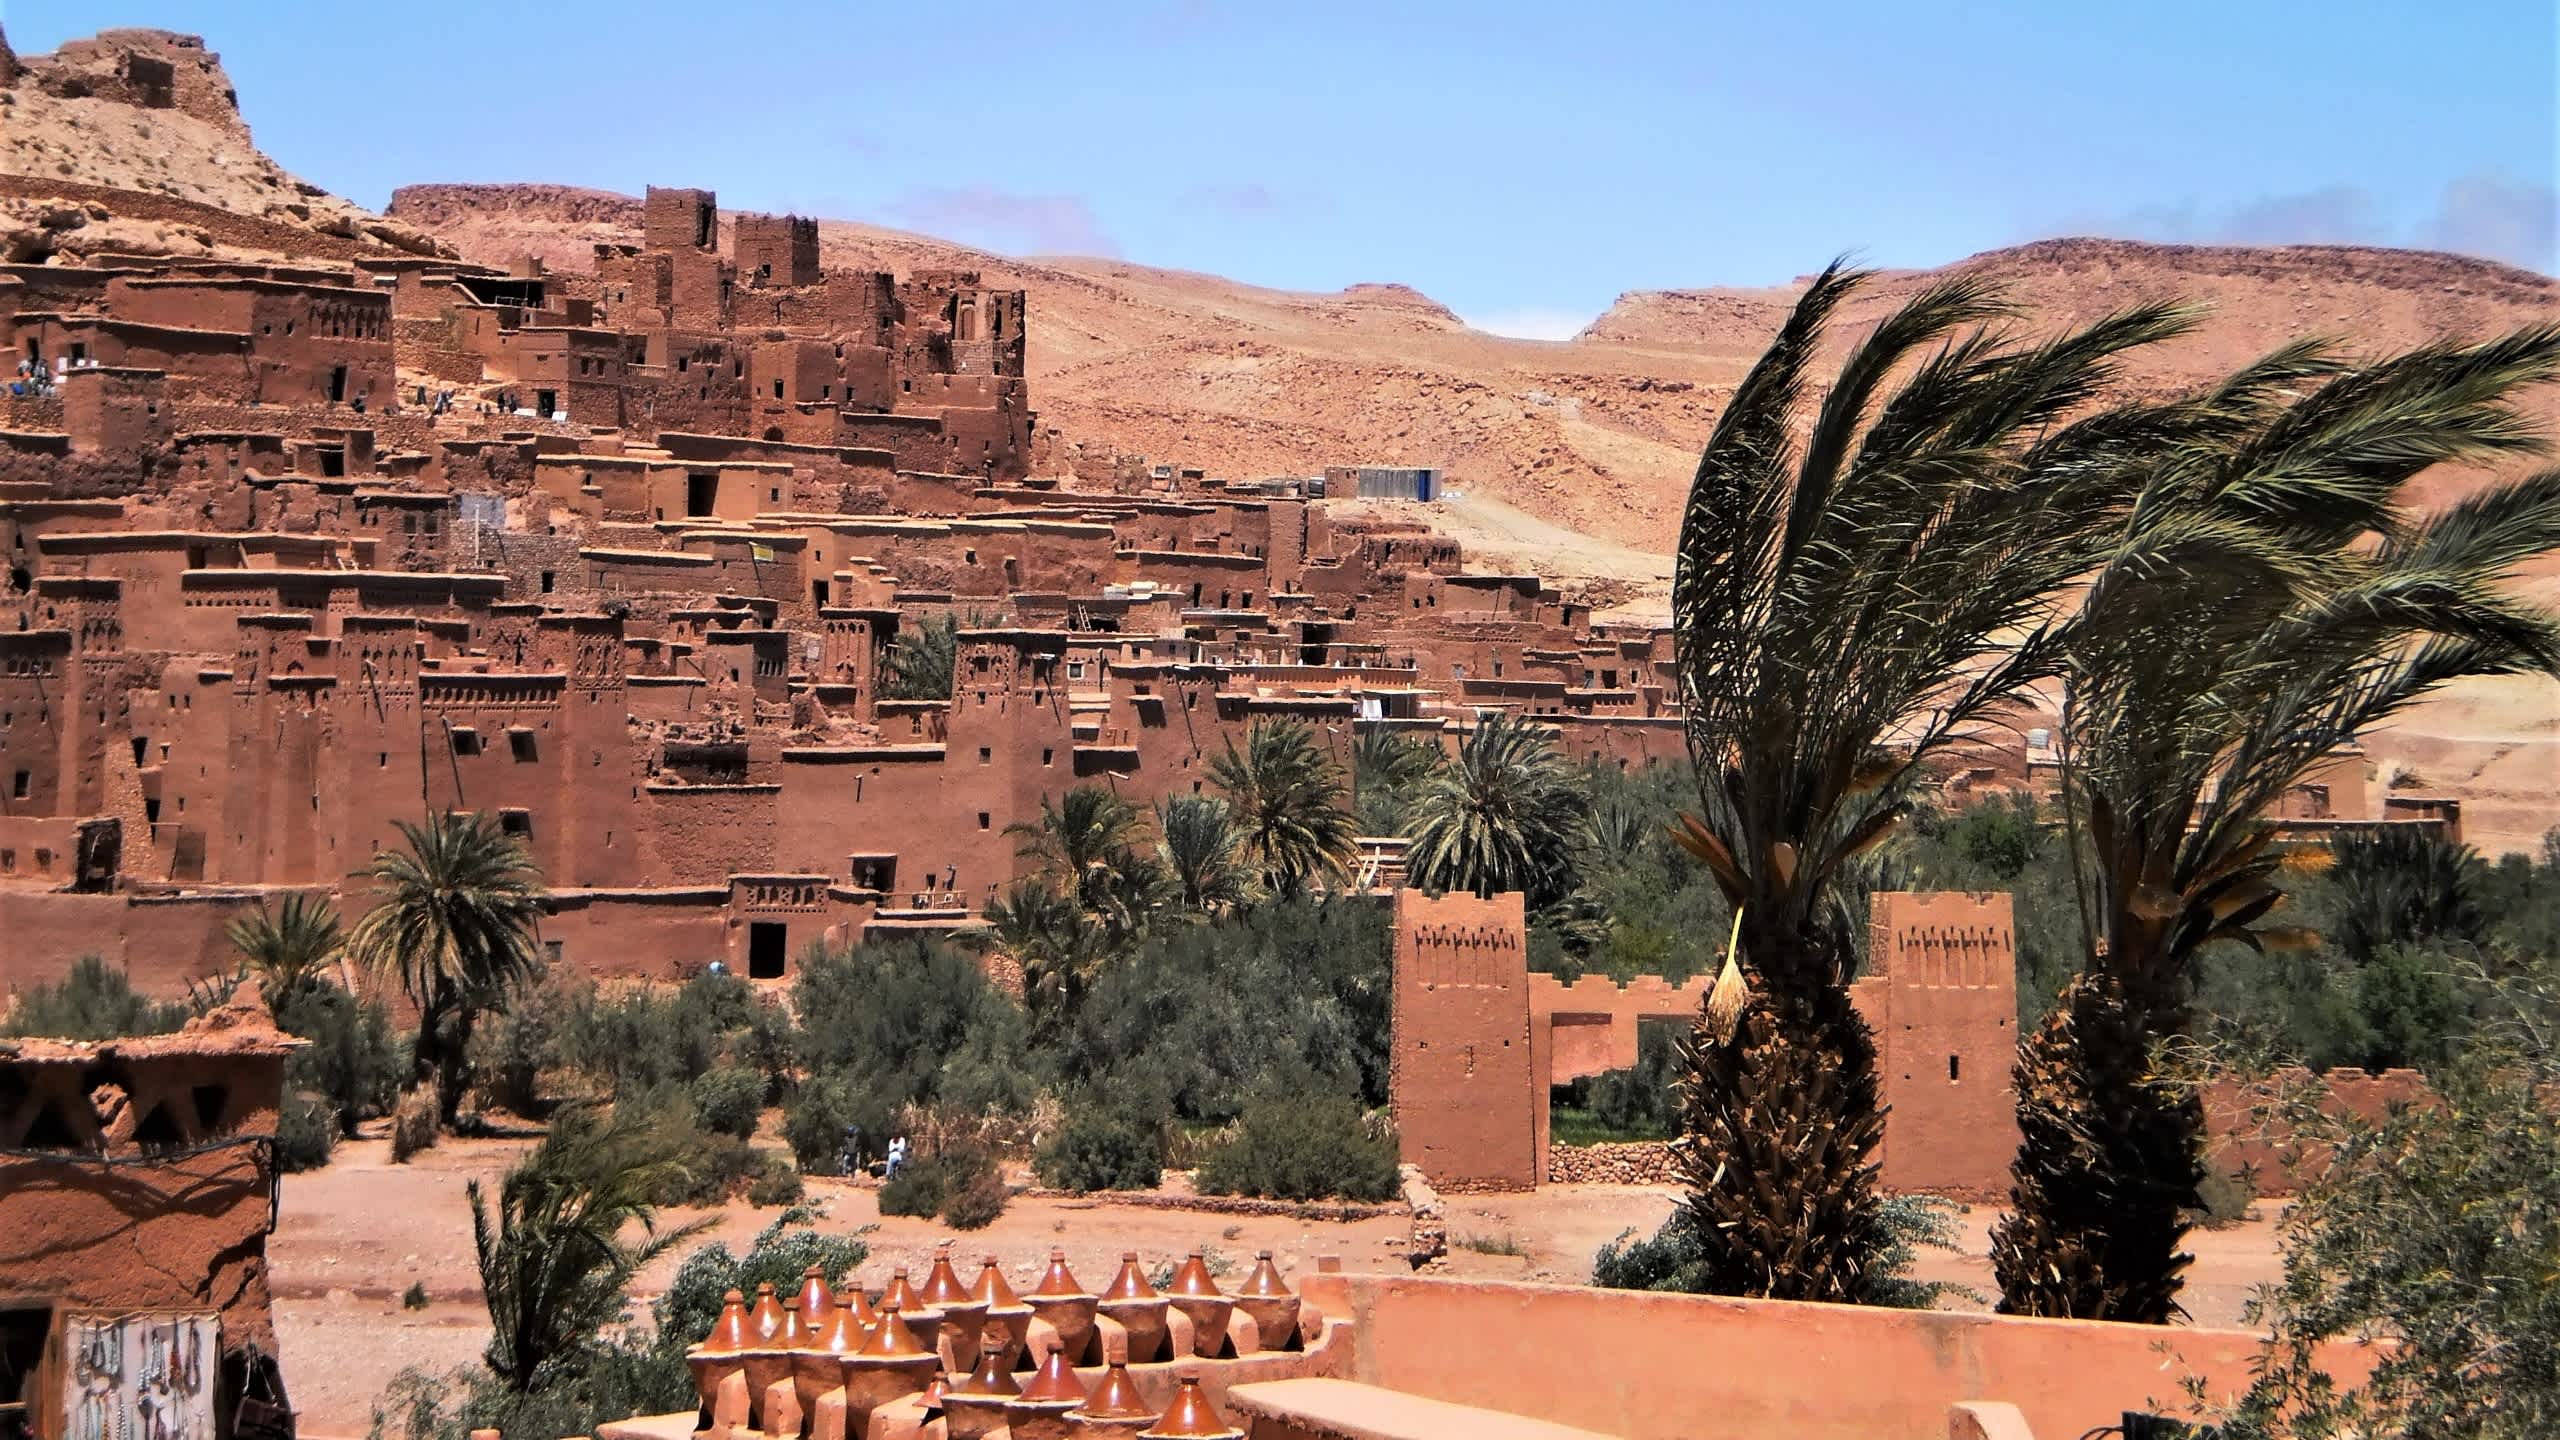 Buildings and palm trees in Aït-Ben-Haddou, Morocco